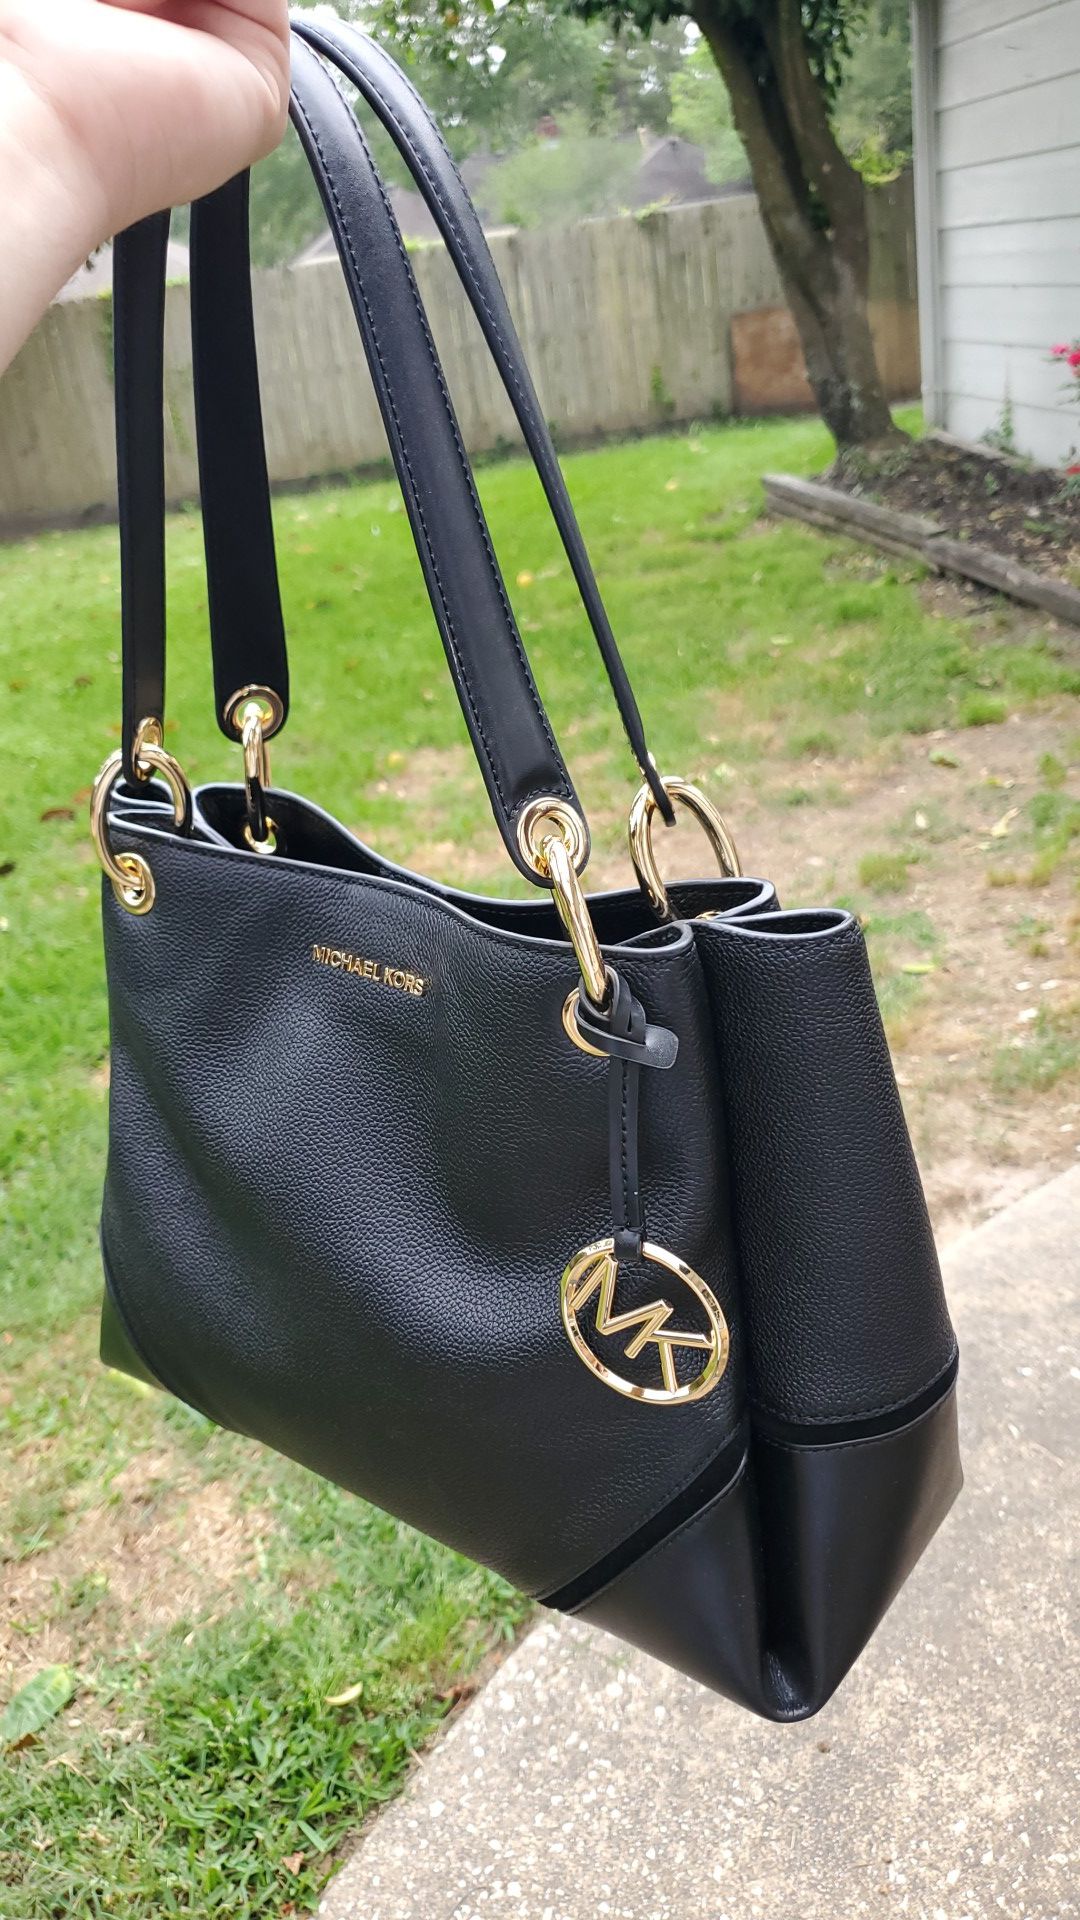 Michael Kors Bucket Bag for Sale in Humble, TX - OfferUp